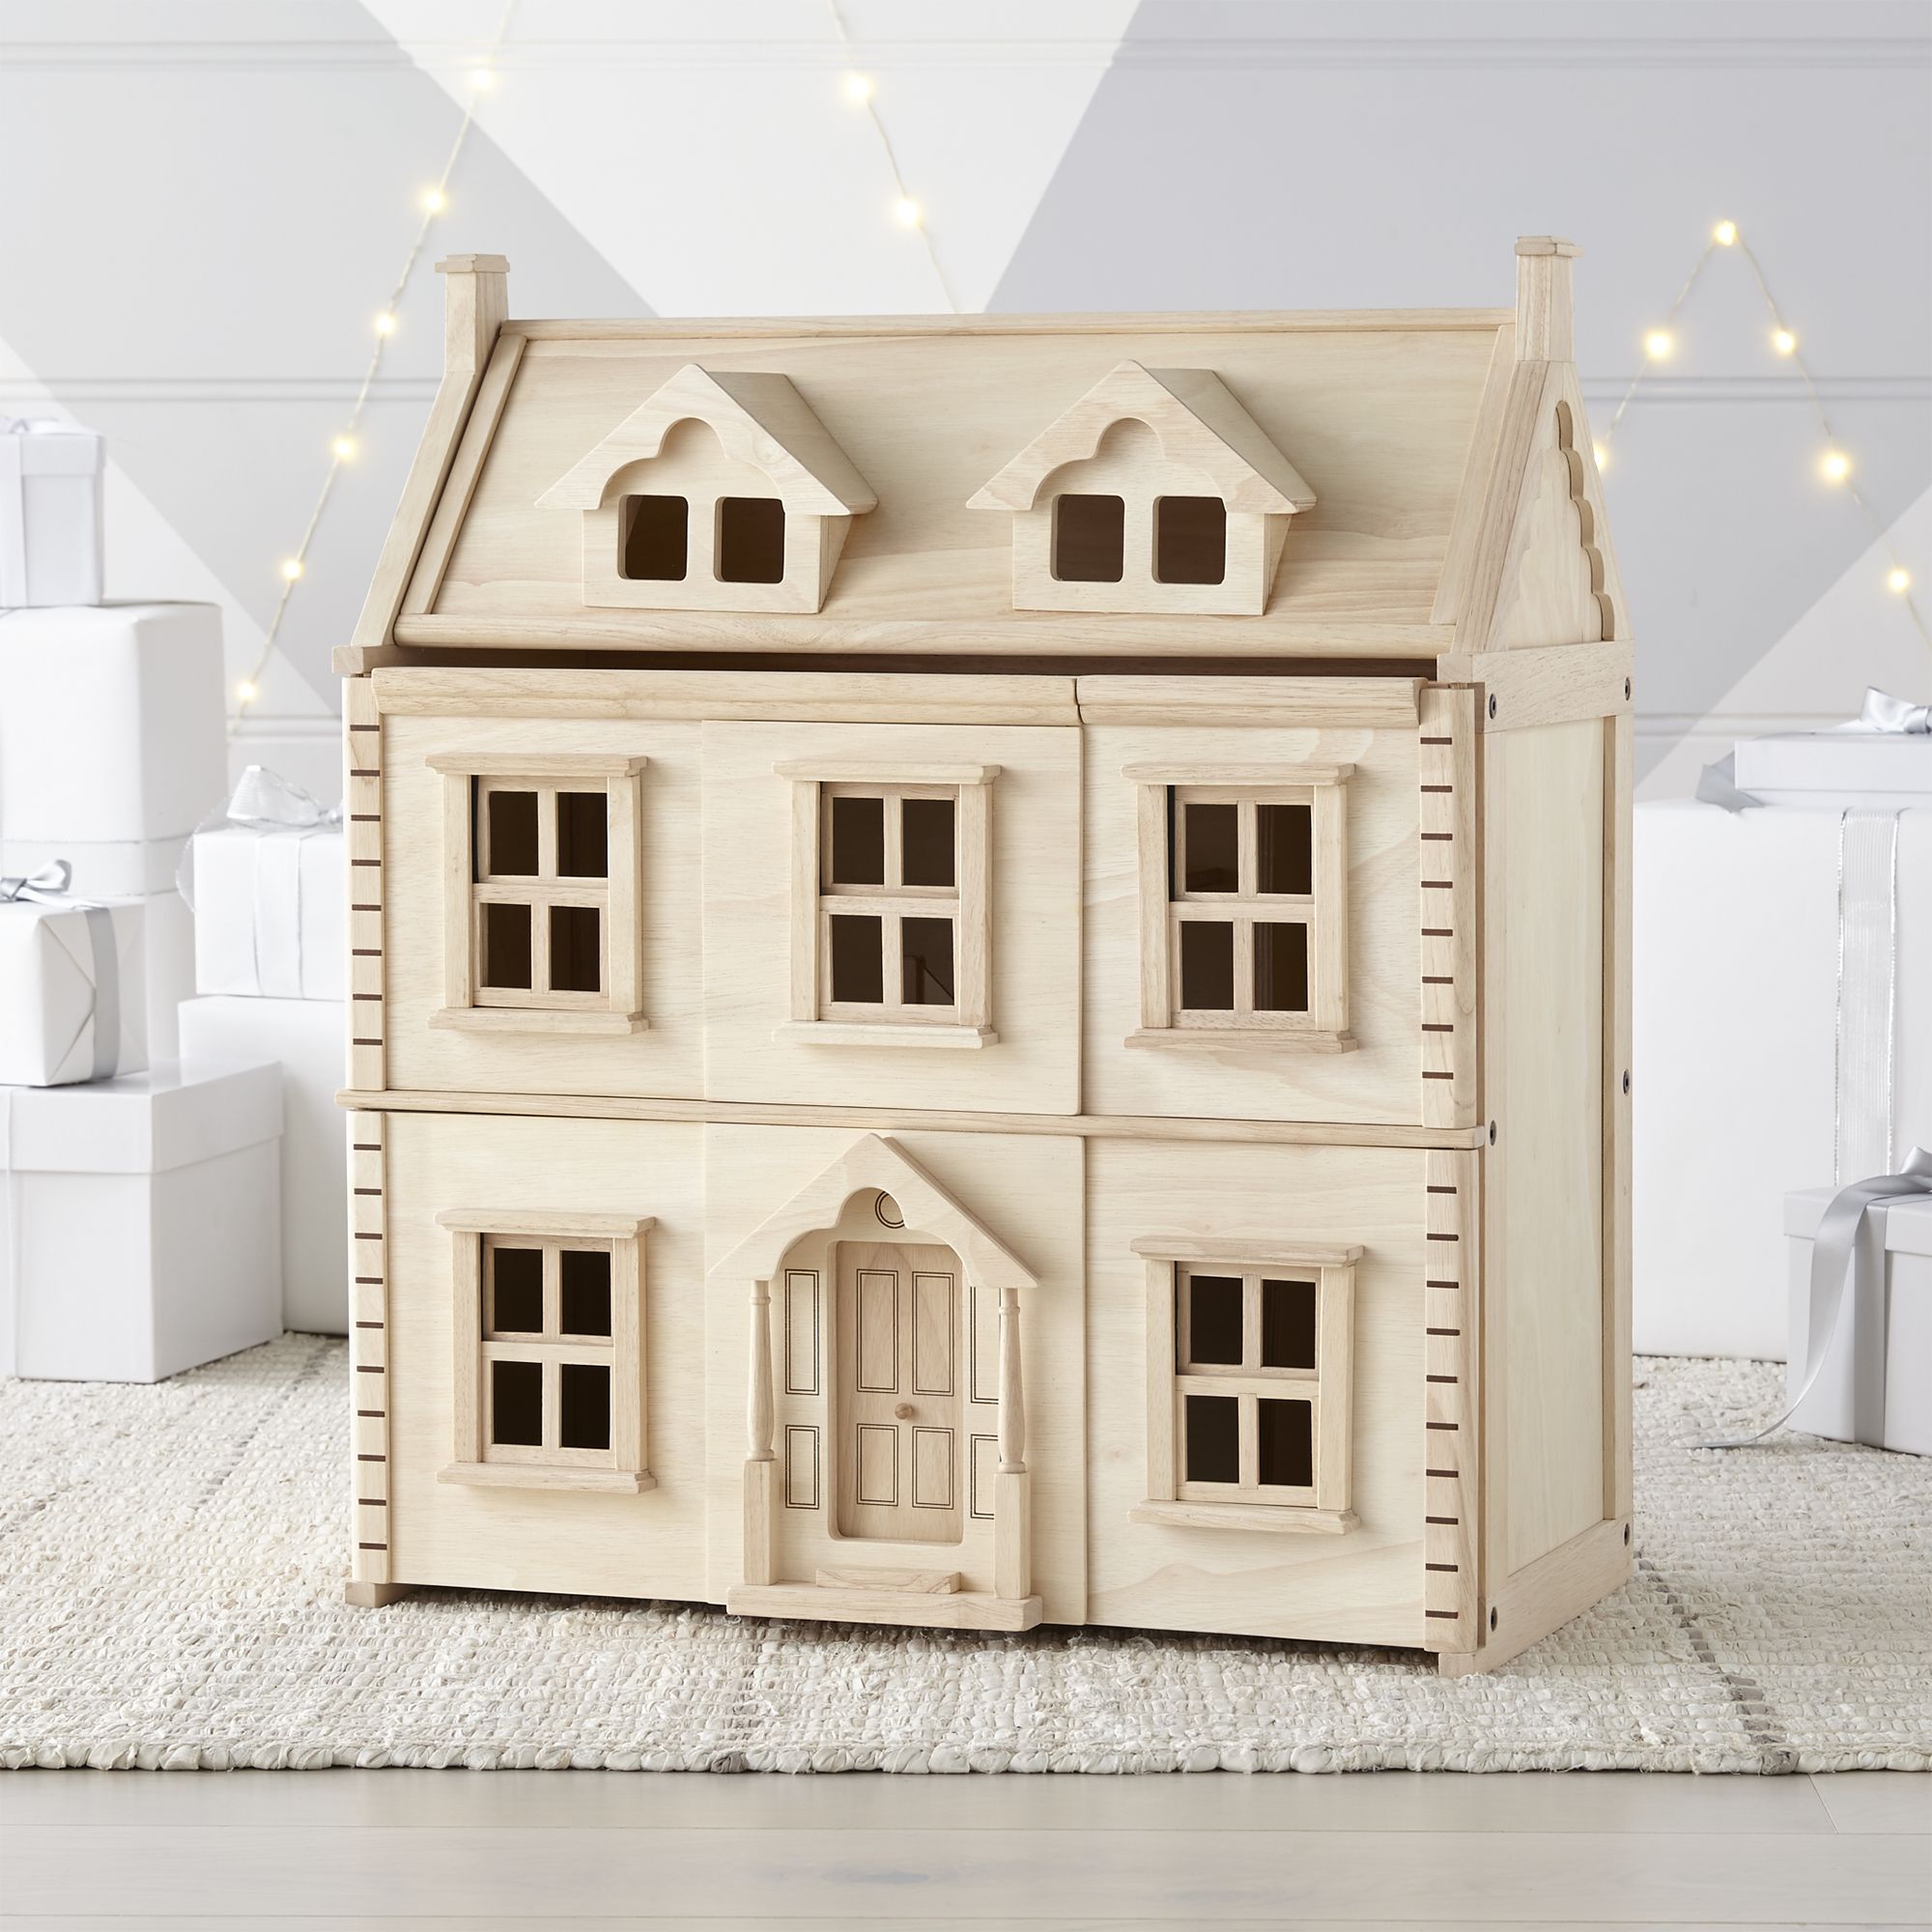 2018 Holiday Gift Guide for Kids: Victorian Dollhouse